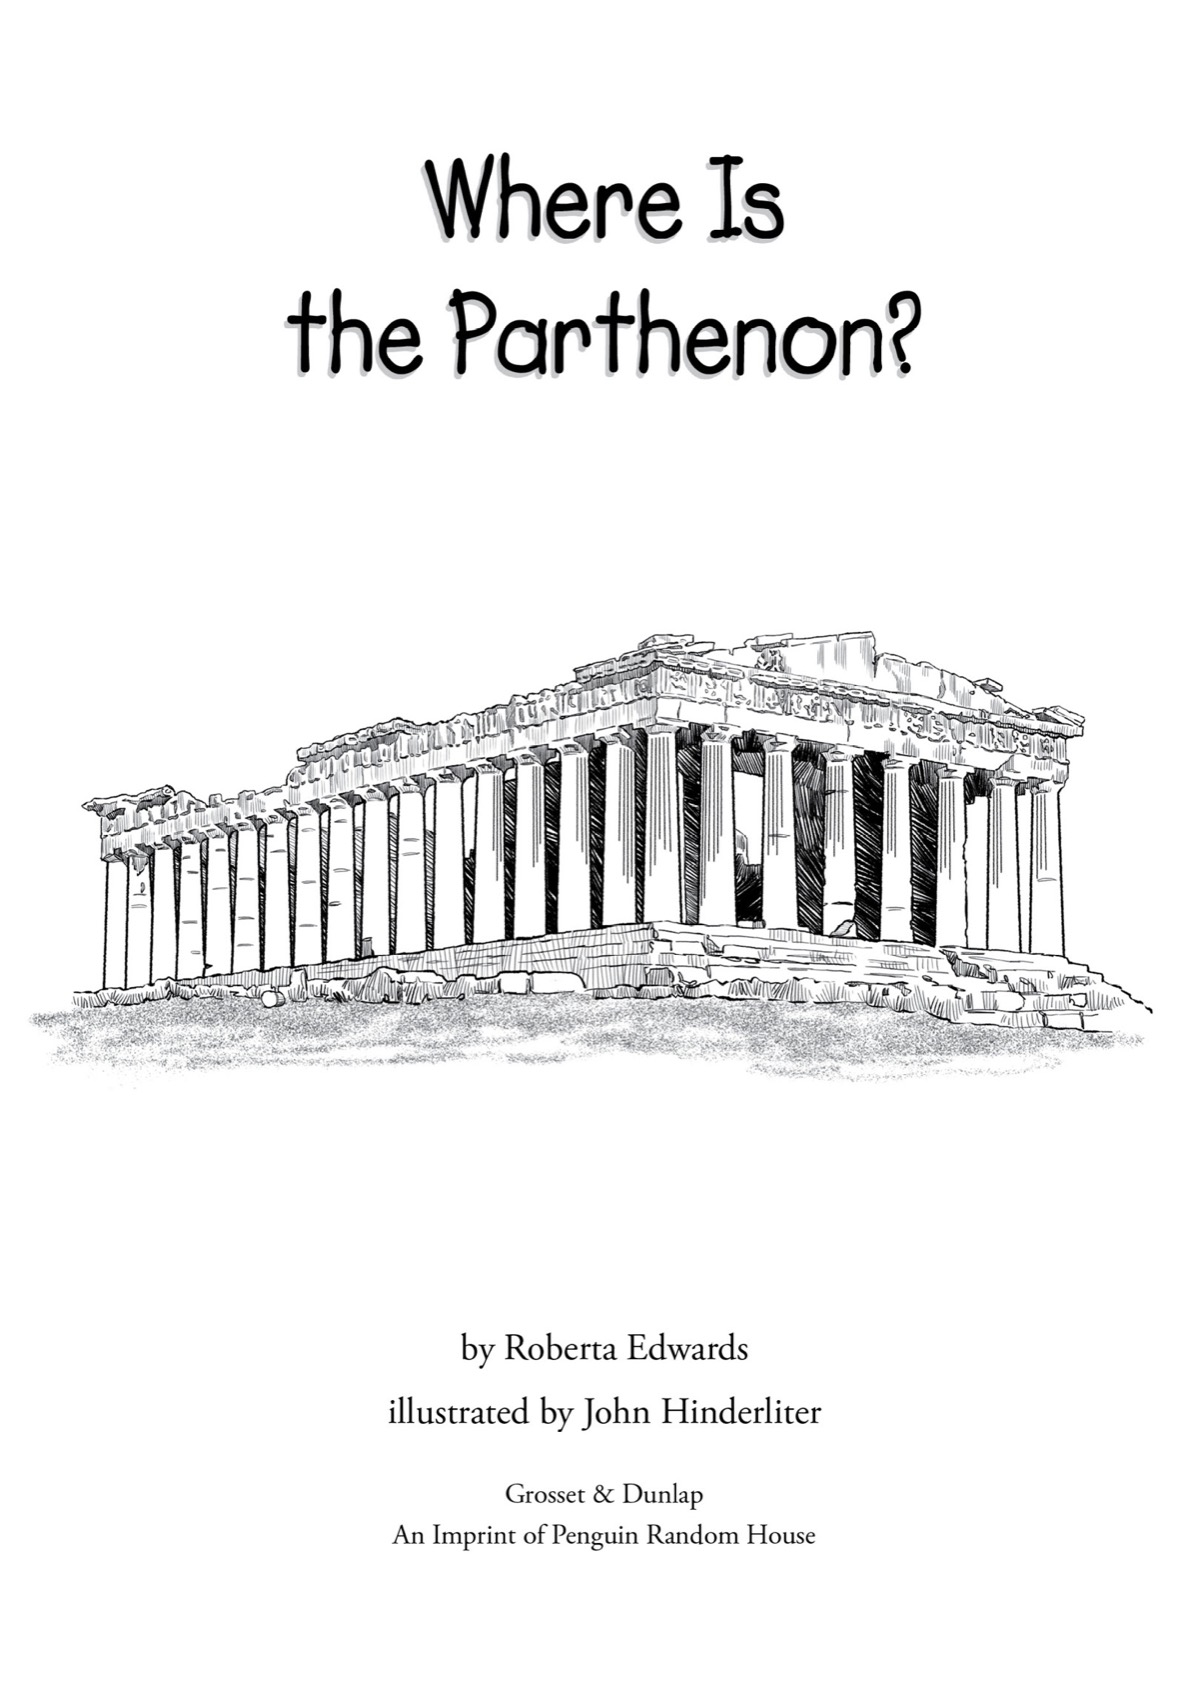 Where Is the Parthenon - image 2